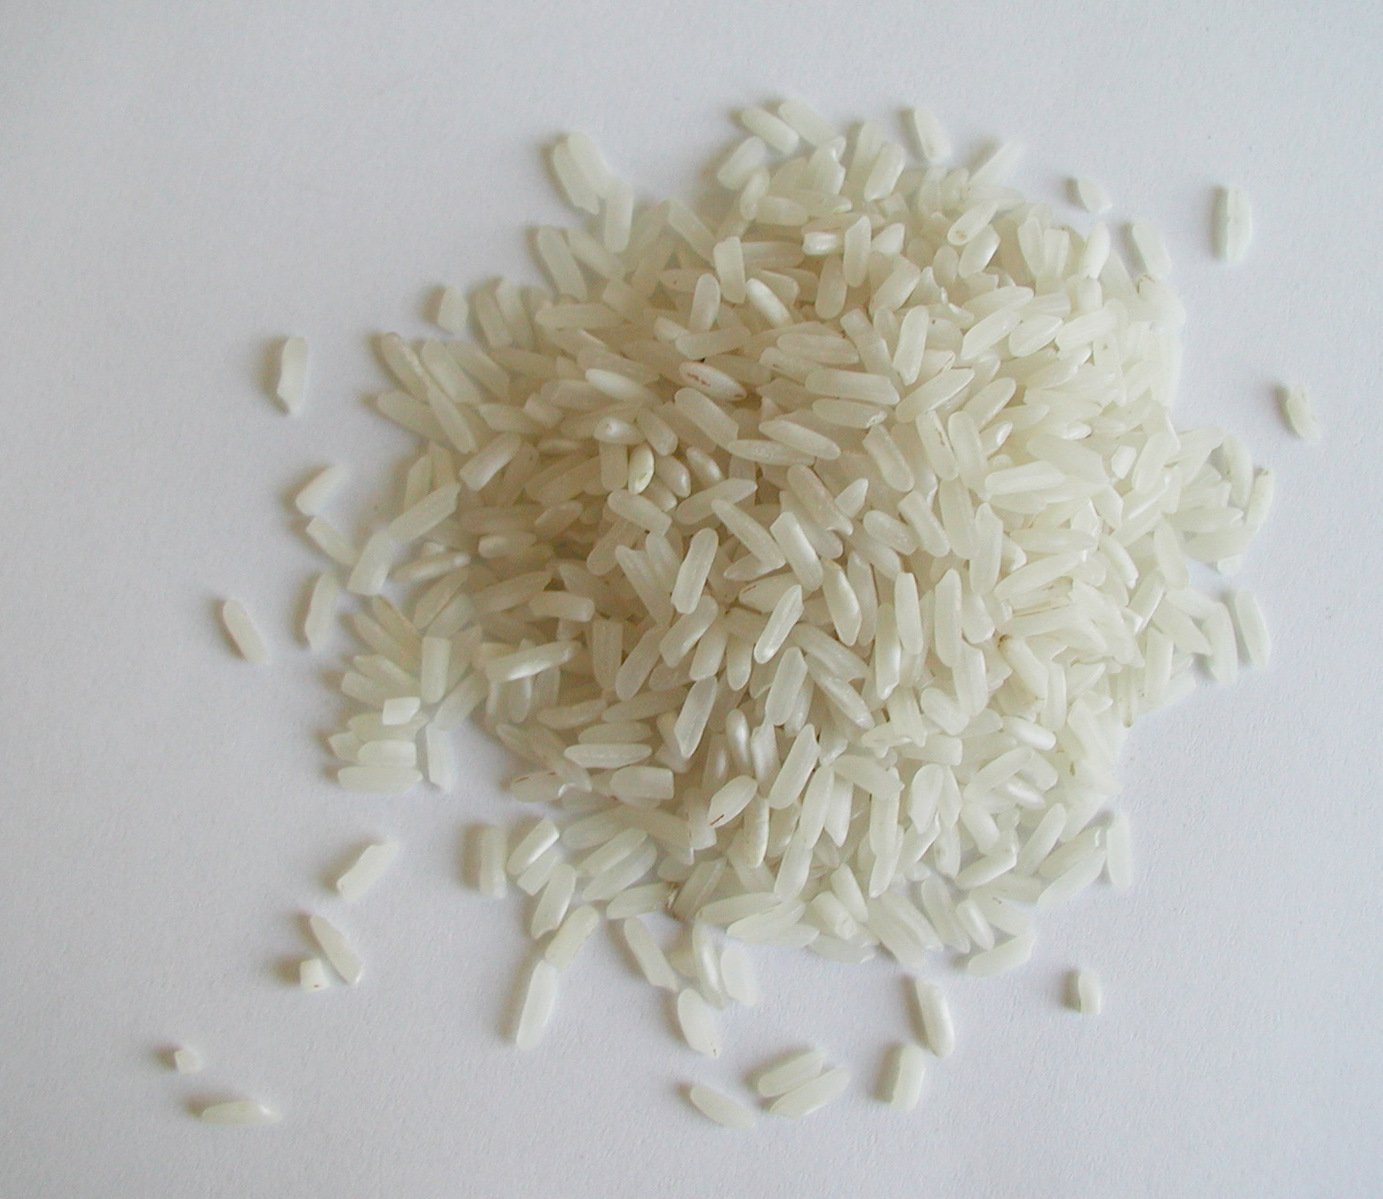 rice scattered on white surface next to food item